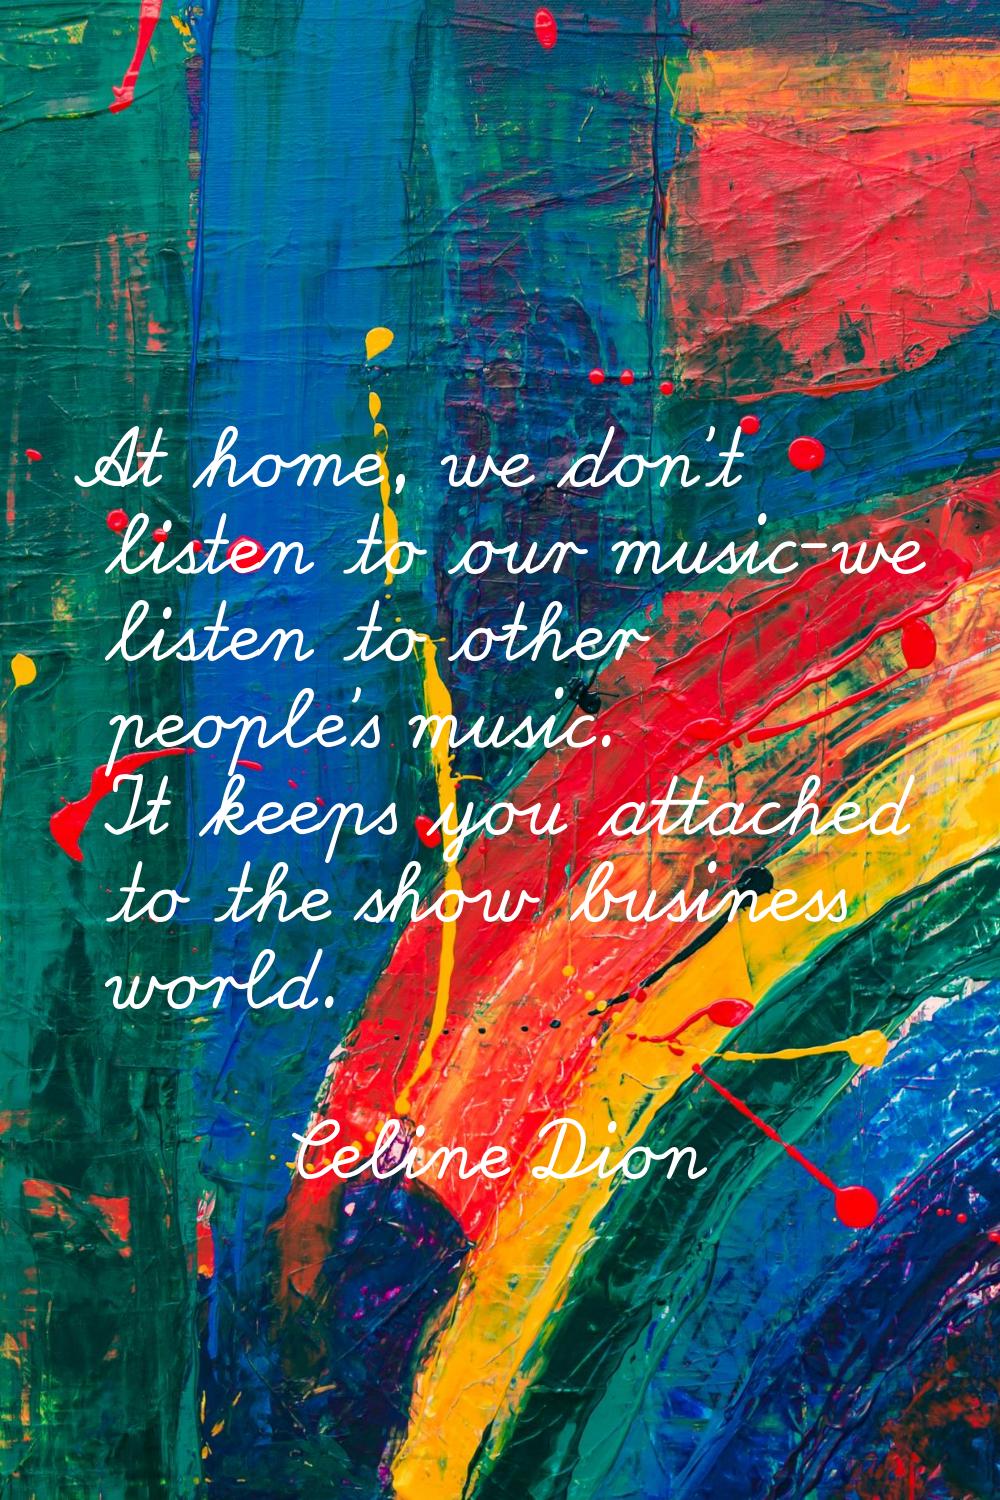 At home, we don't listen to our music-we listen to other people's music. It keeps you attached to t